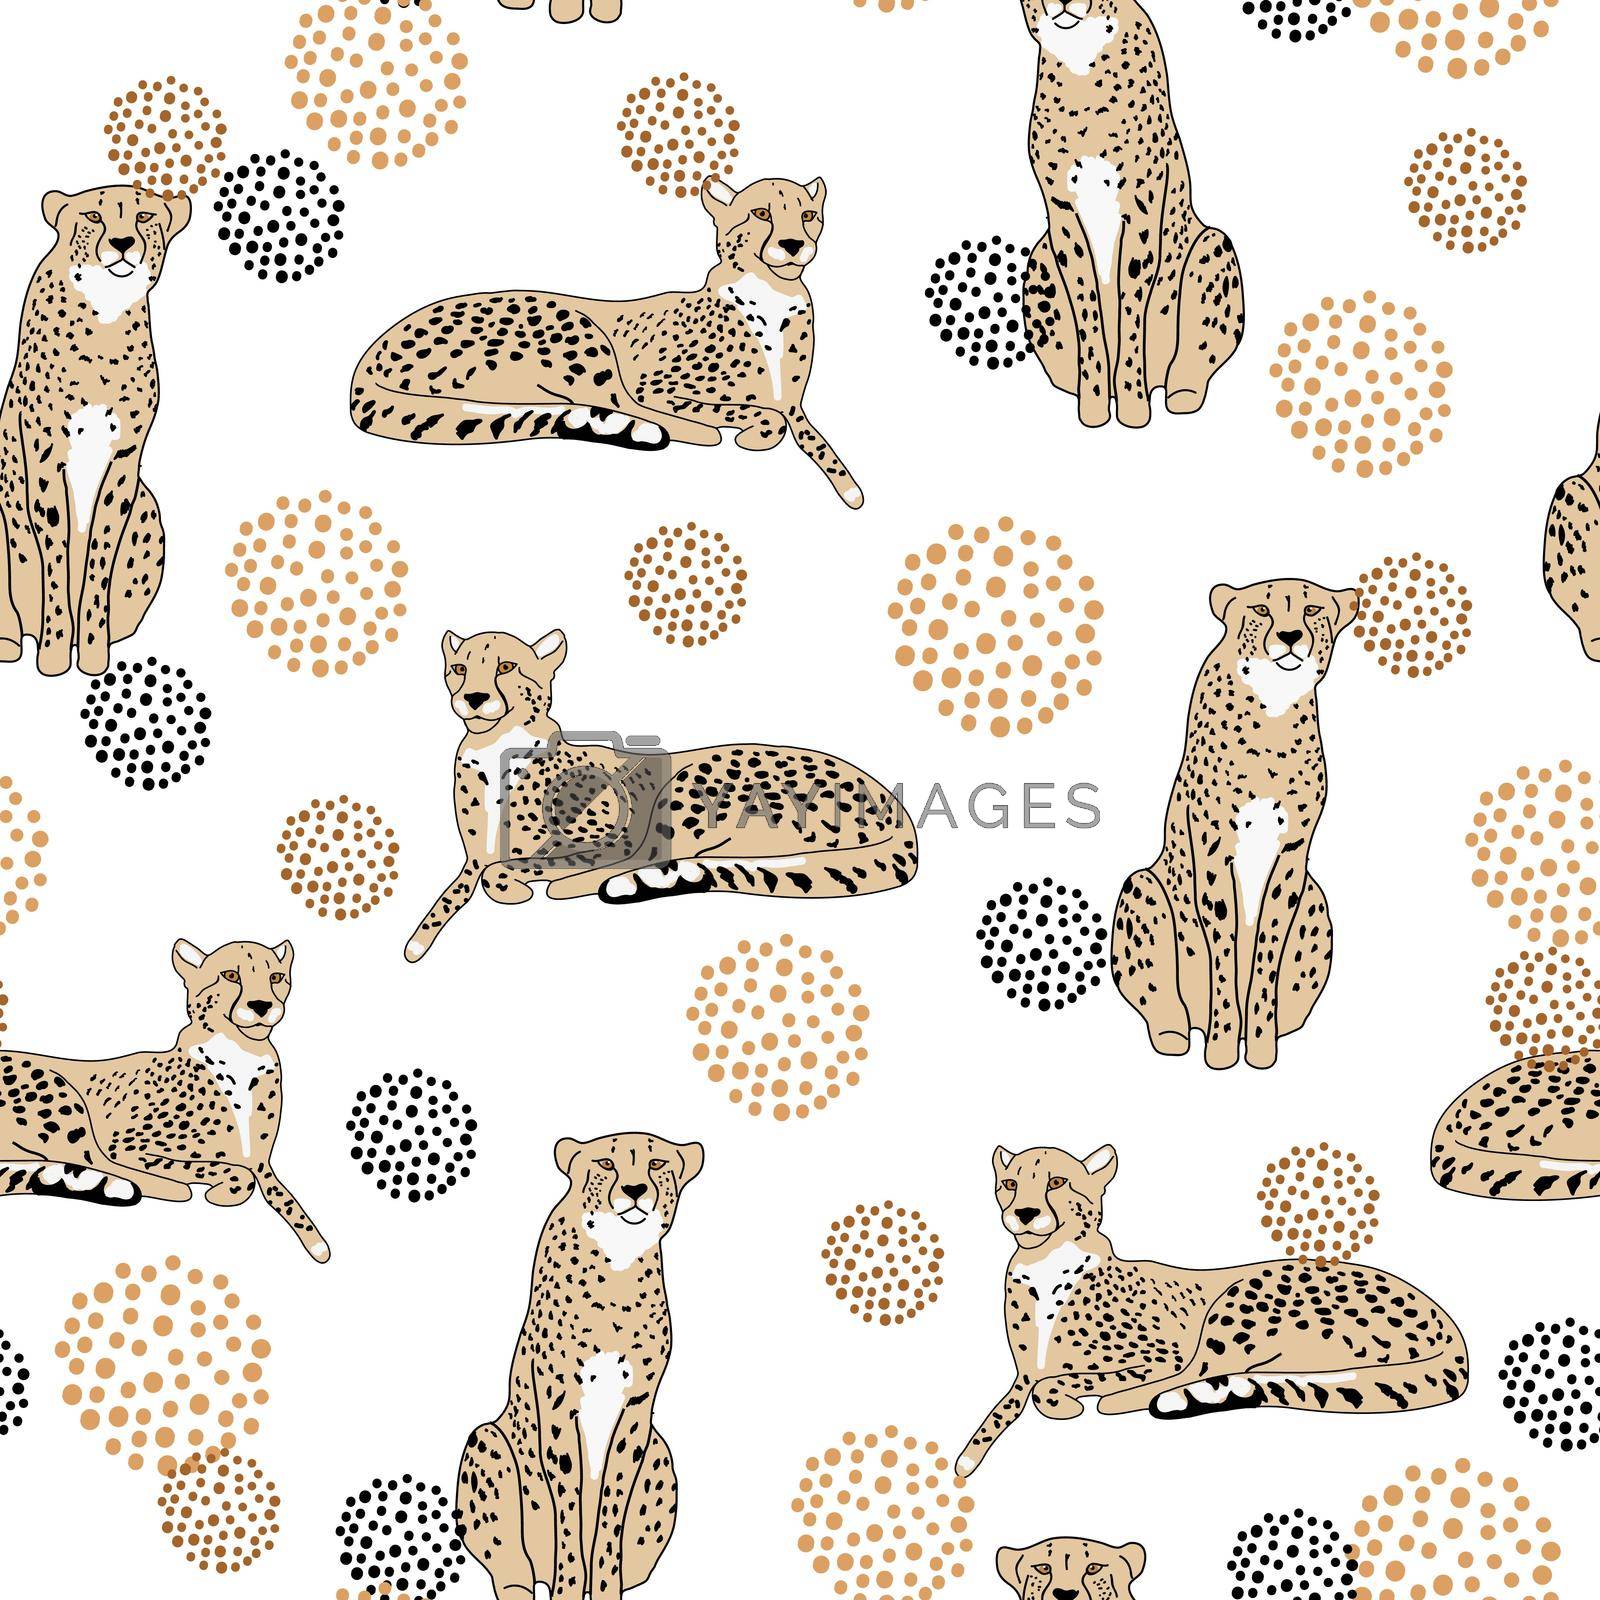 Royalty free image of Seamless background cheetah and abstract circle shapes by elinnet